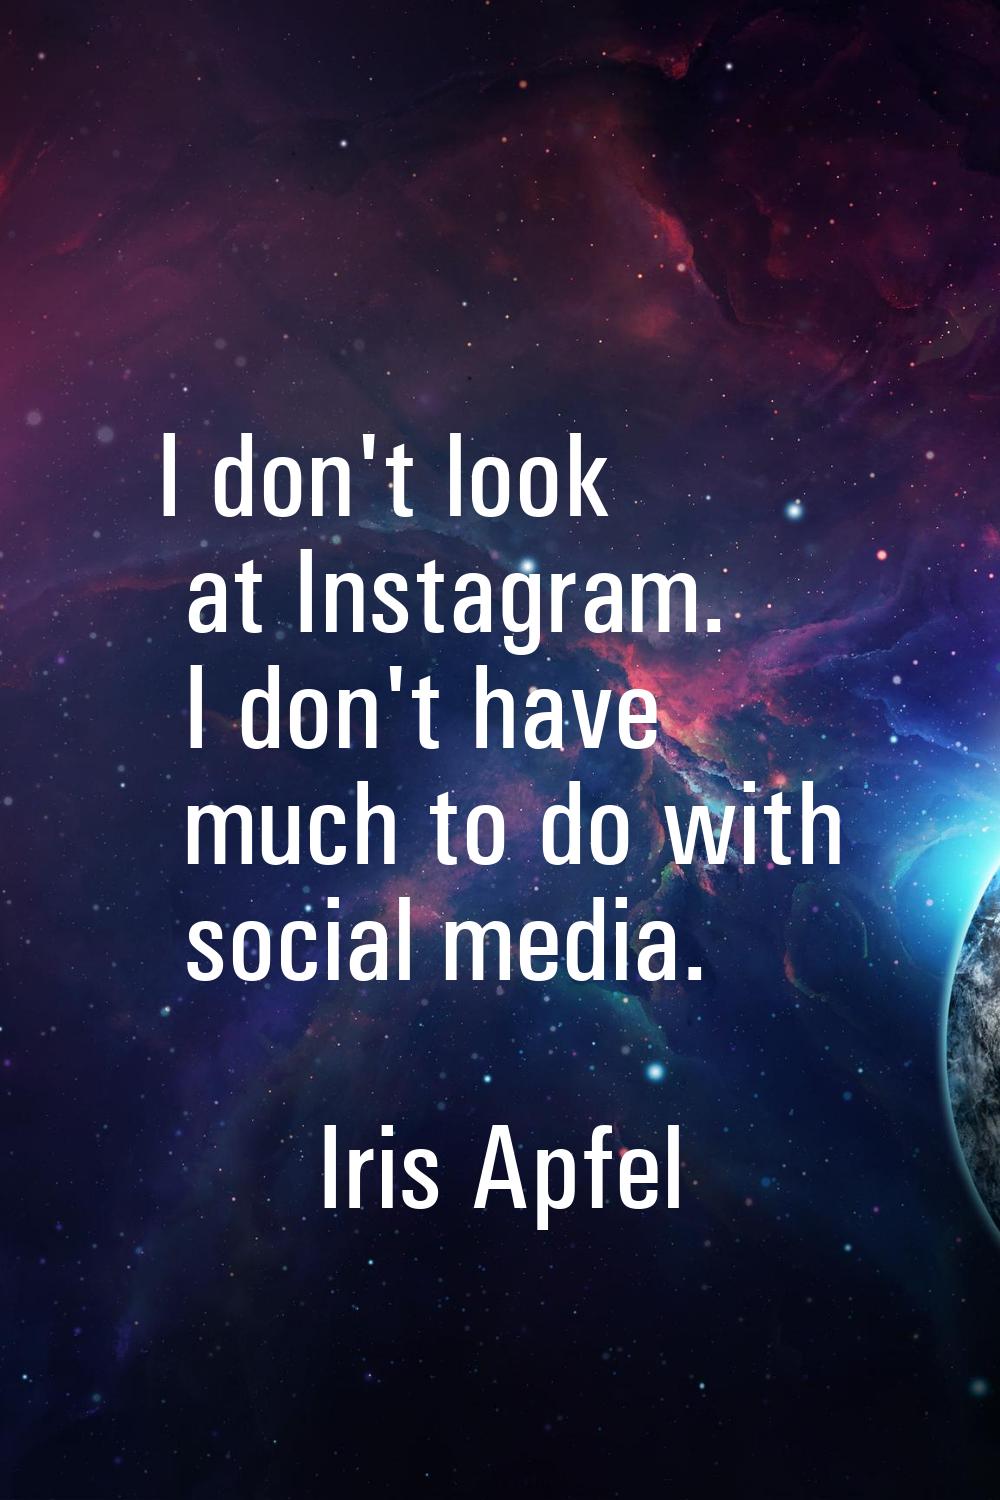 I don't look at Instagram. I don't have much to do with social media.